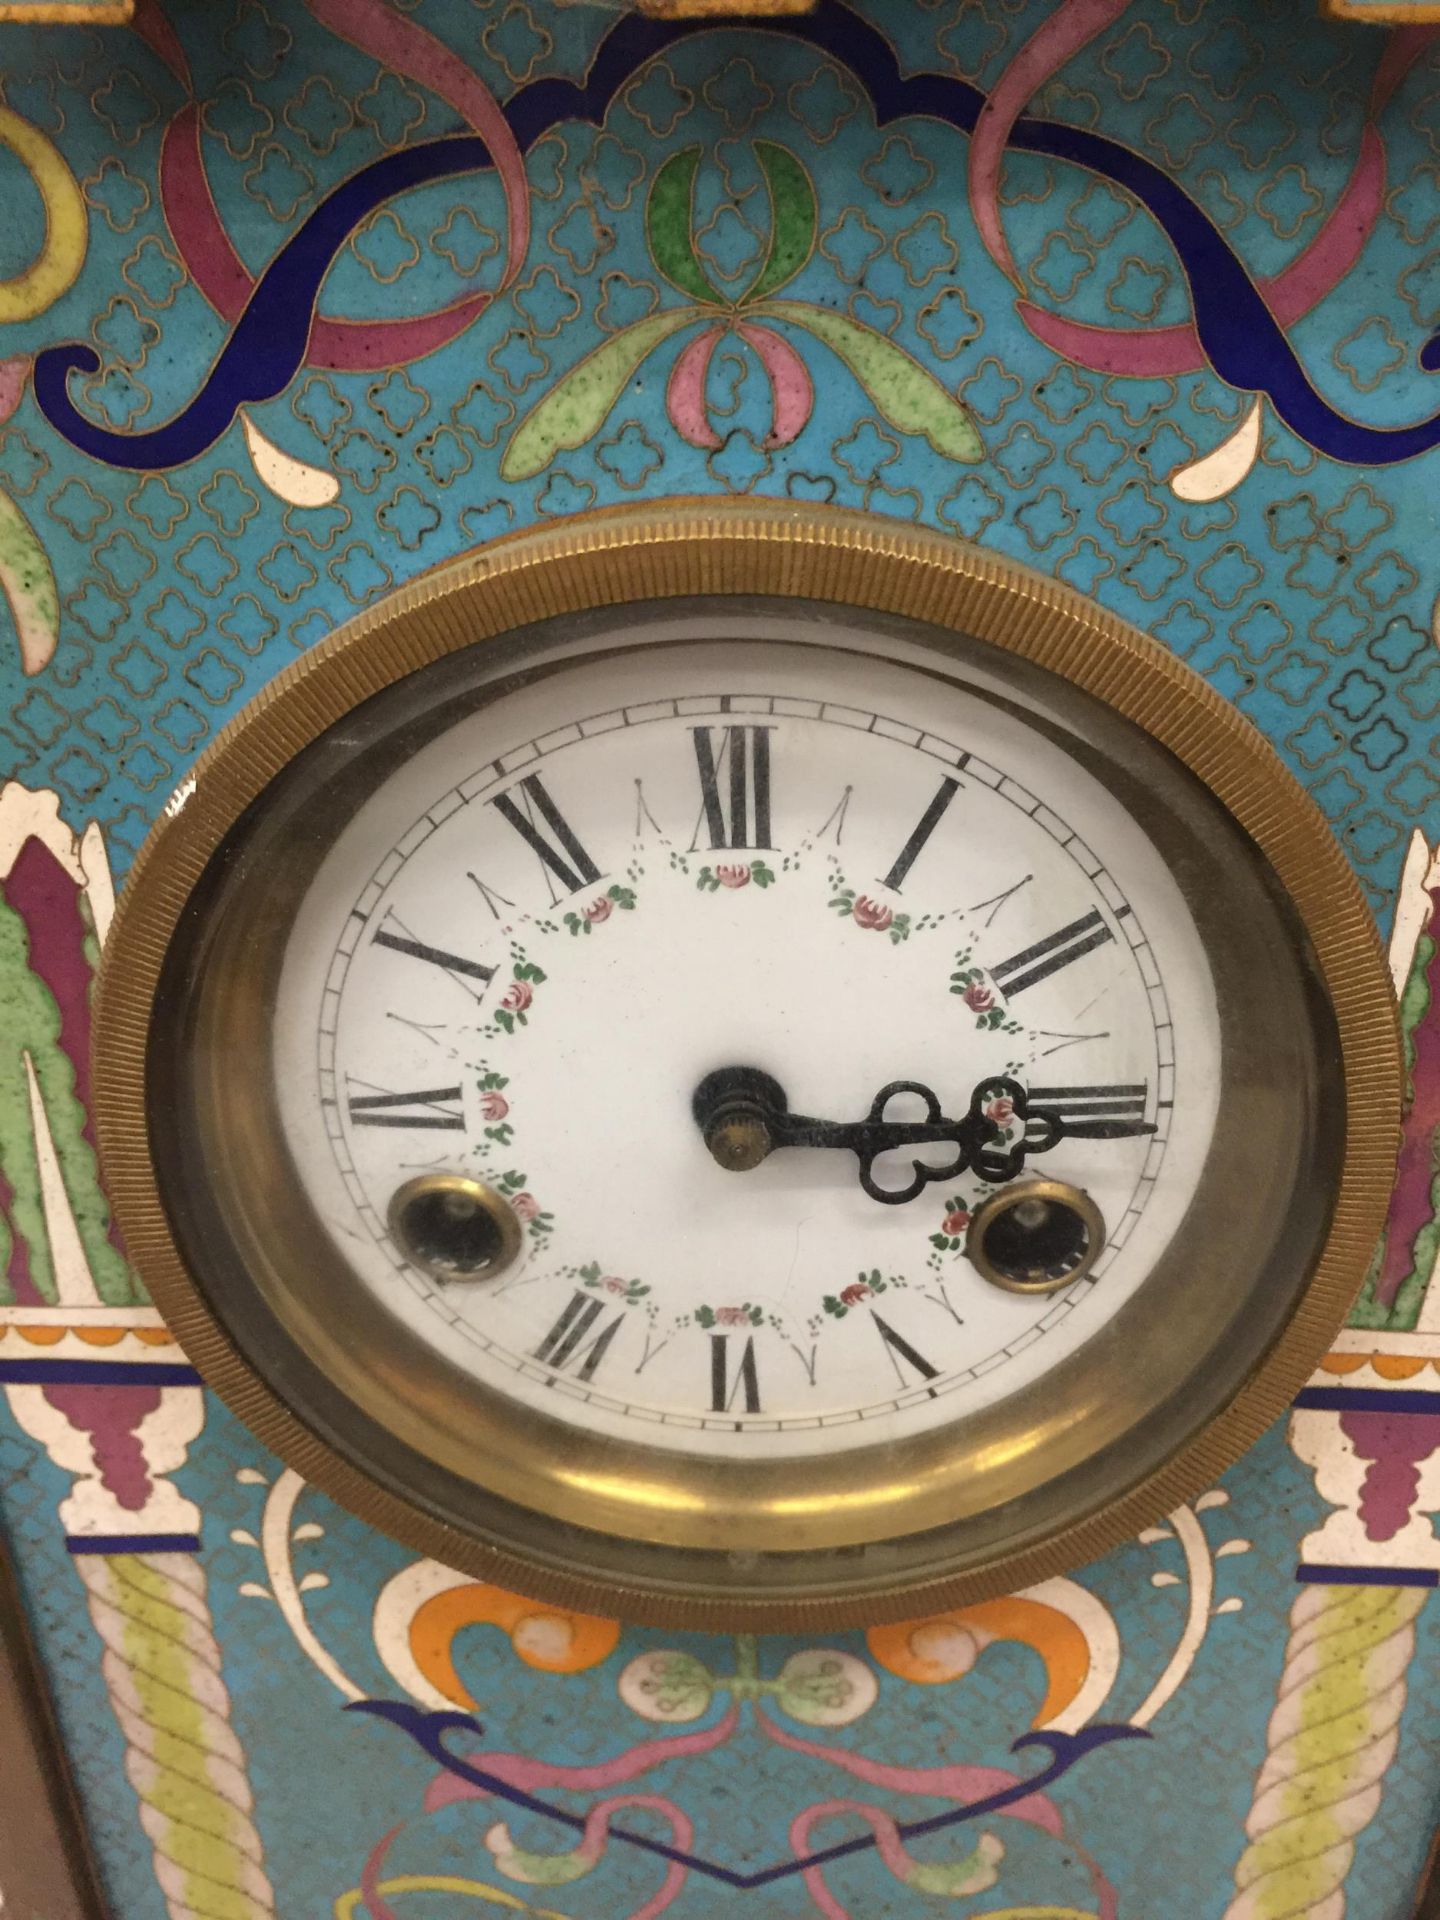 AN ART NOUVEAU CLOISONNE AND BRASS CHIMING MANTLE CLOCK WITH RAM HEAD SIDE DESIGN - Image 4 of 8